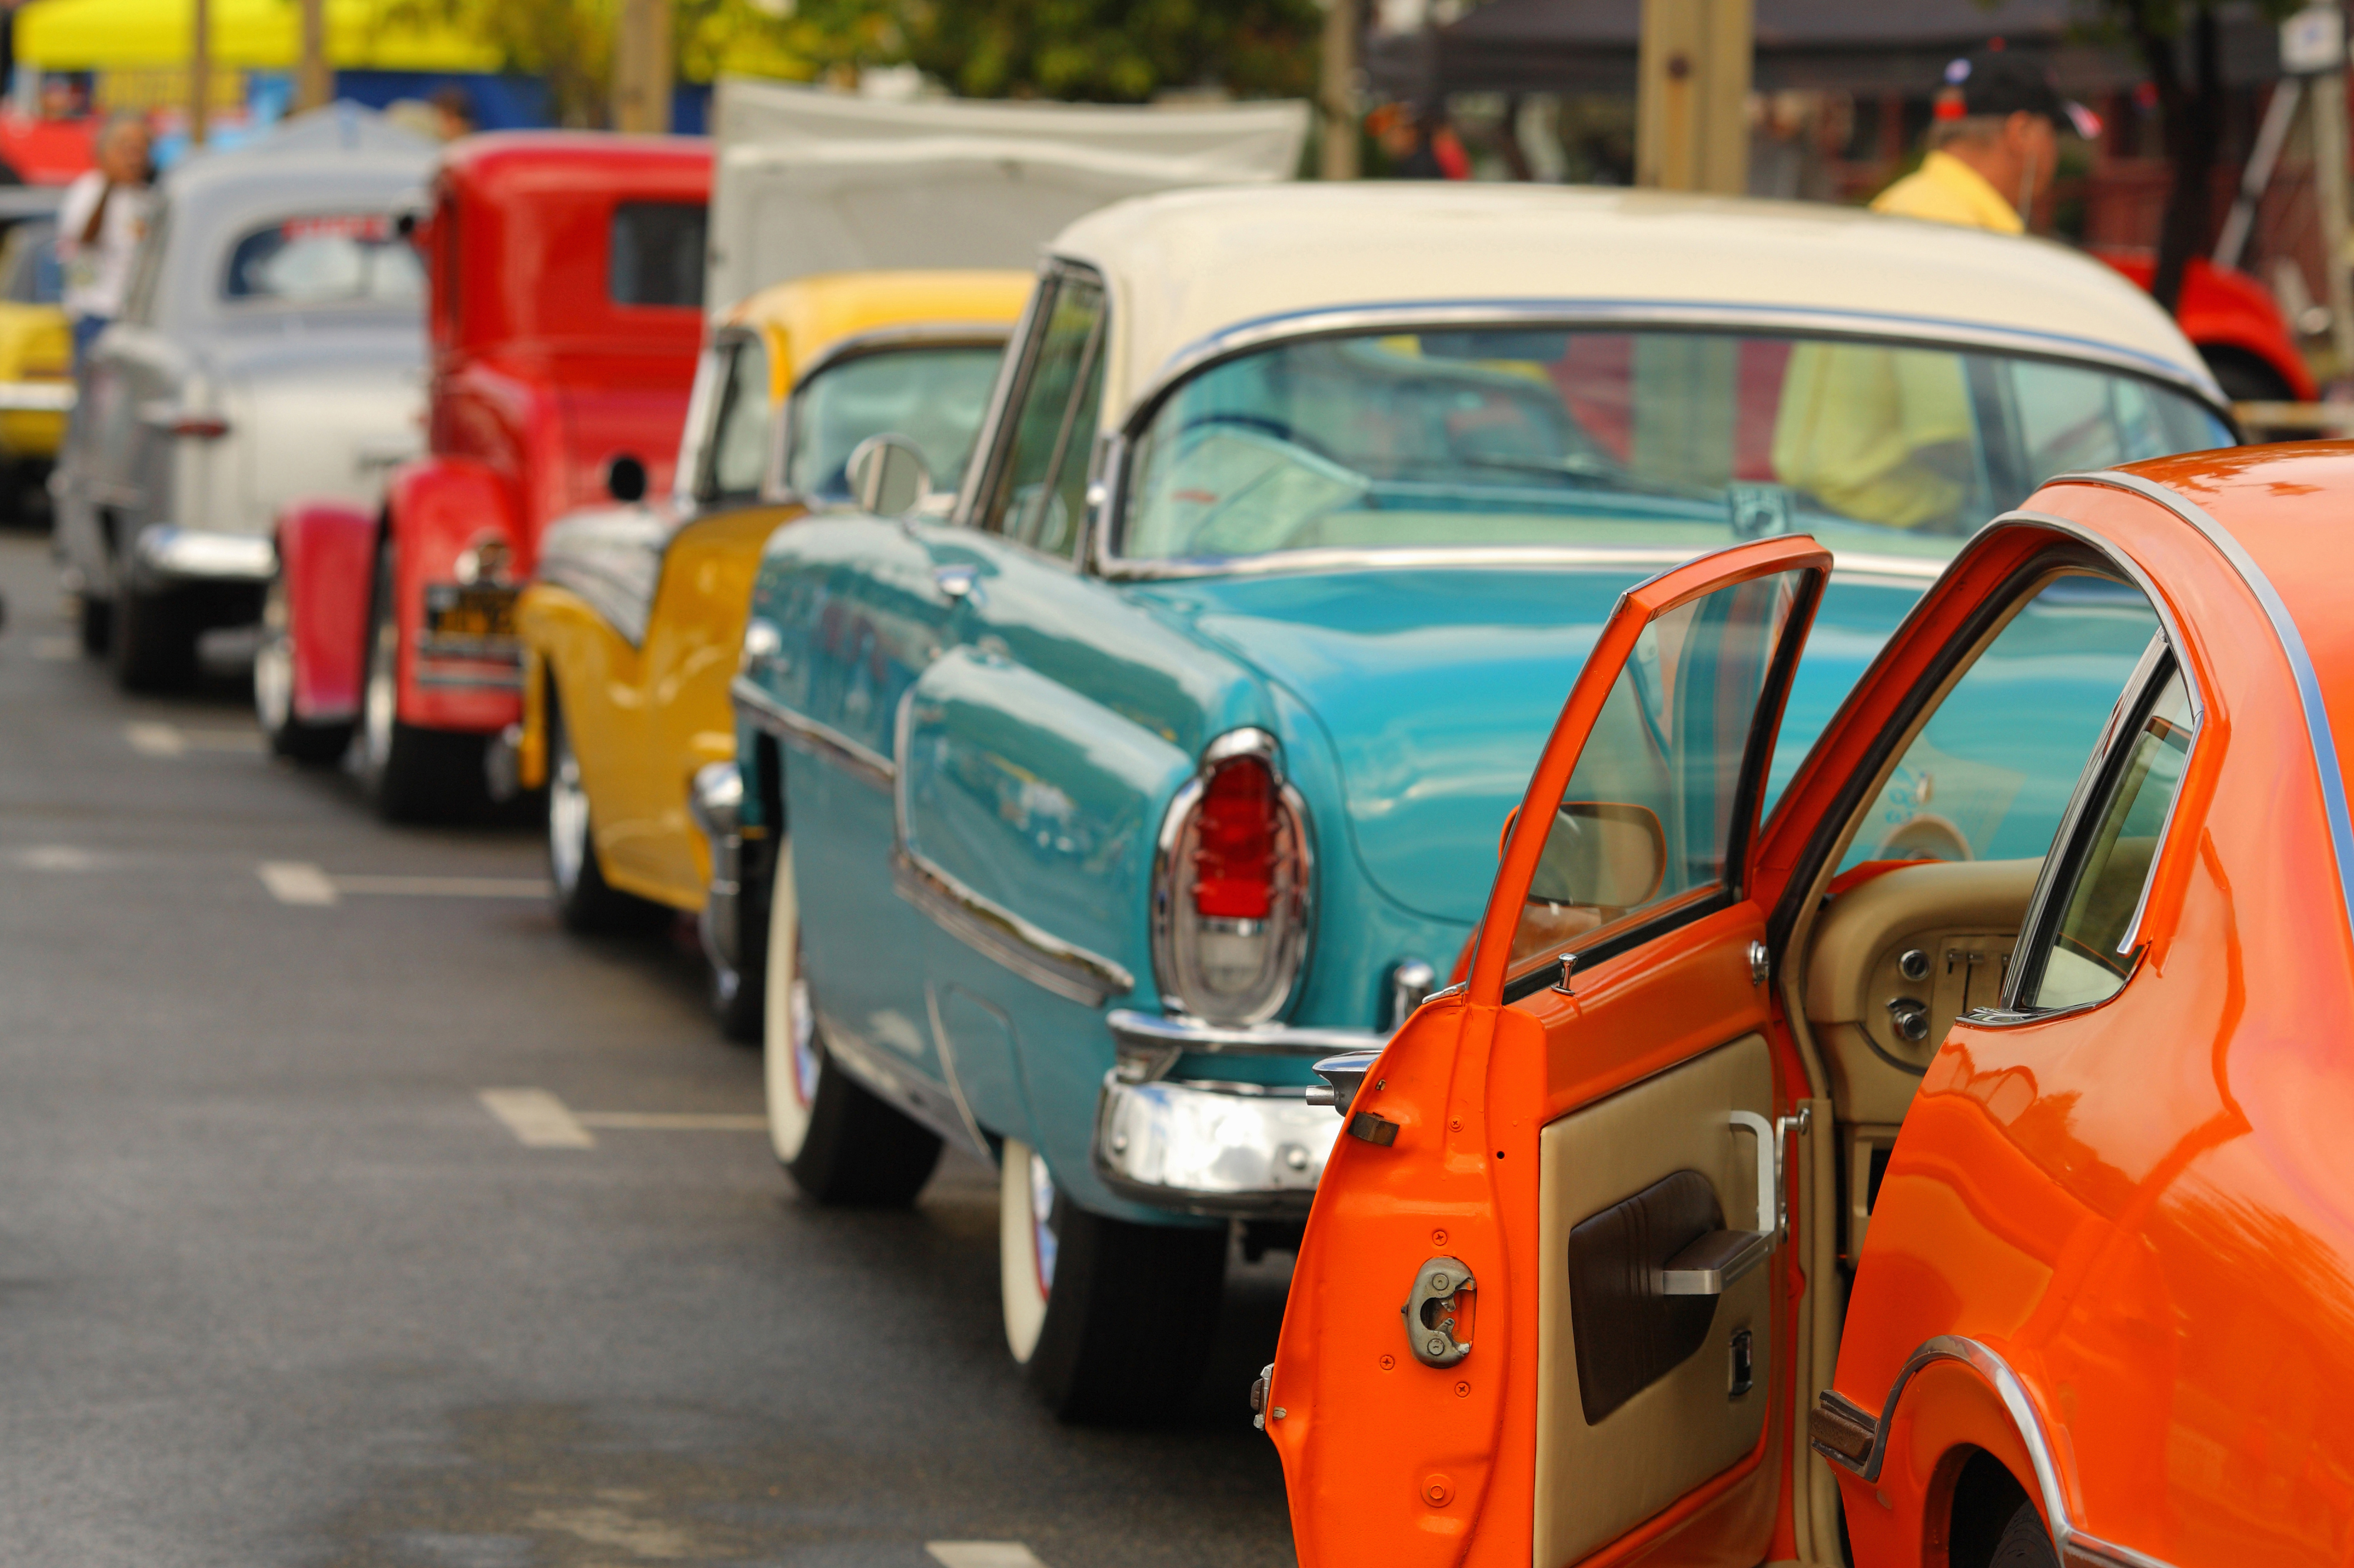 Brightly colored classic cars lined up on the street